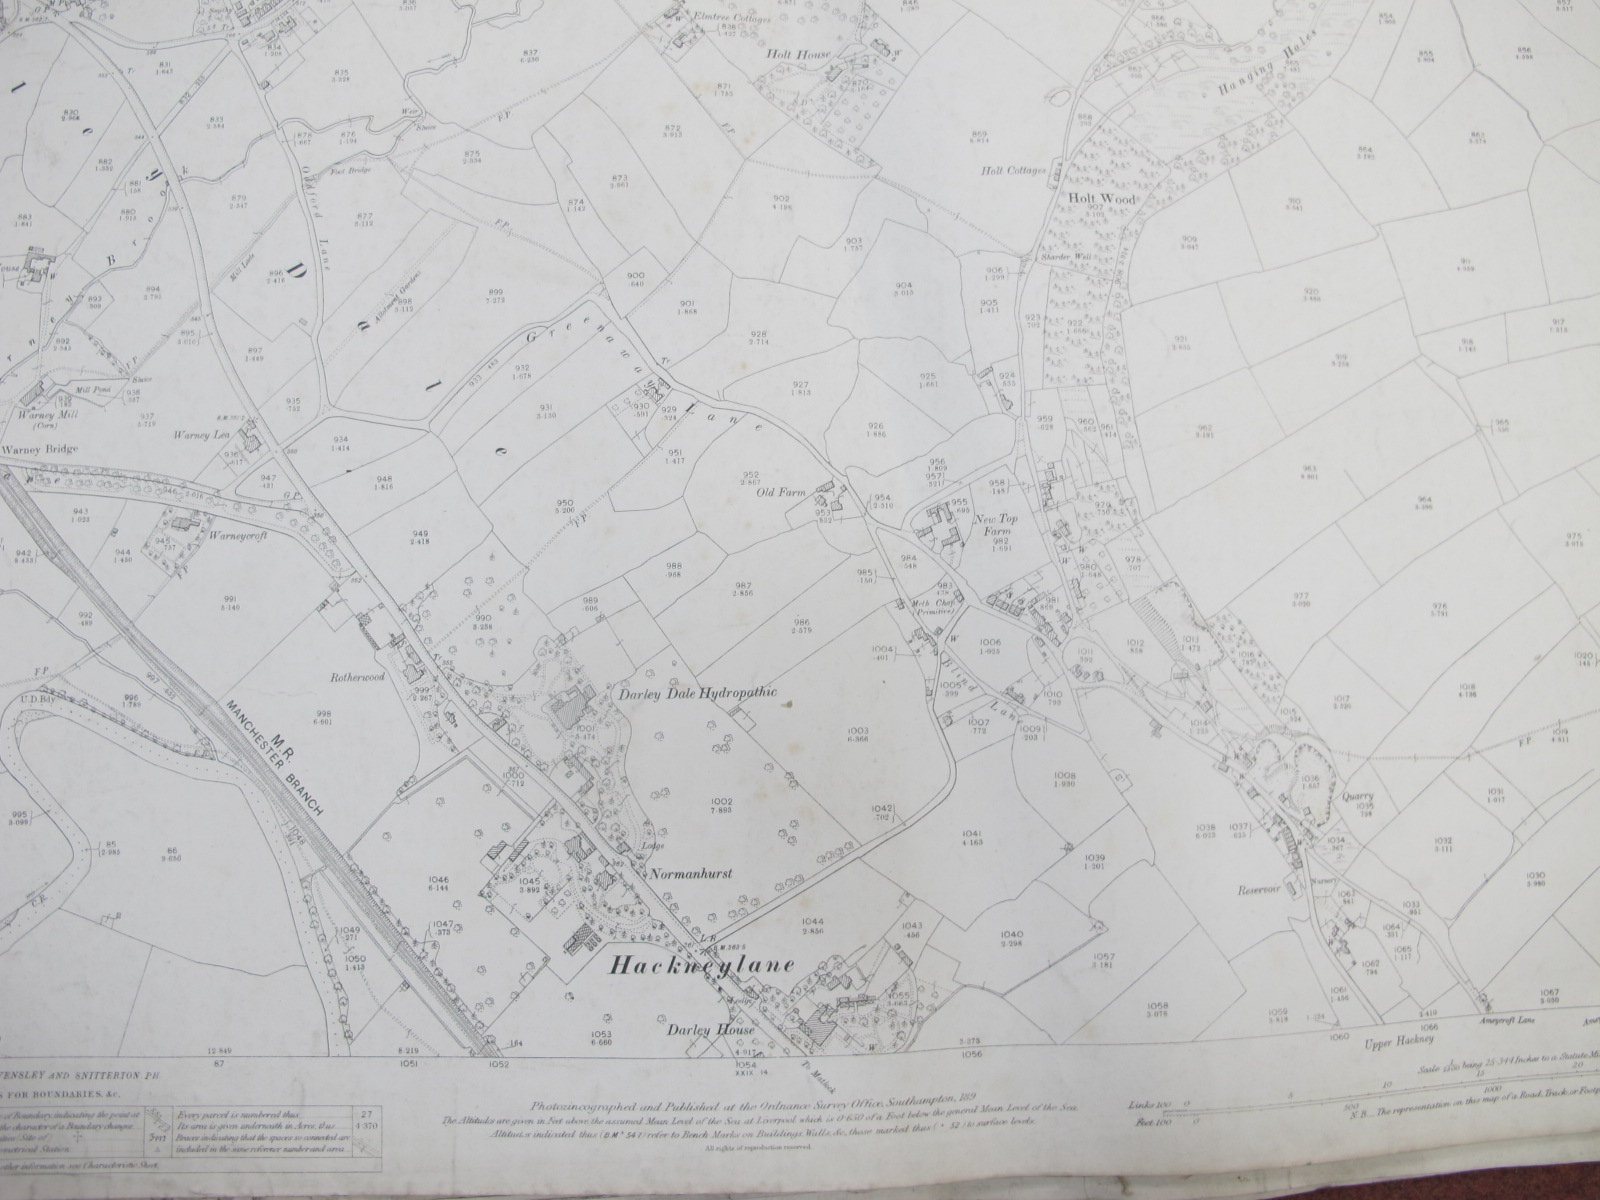 Derbyshire Maps, to include, Matlock Bath, Scarsdale, Cuckoostone Dale, Darley Dale, Youlgreave, - Image 7 of 10